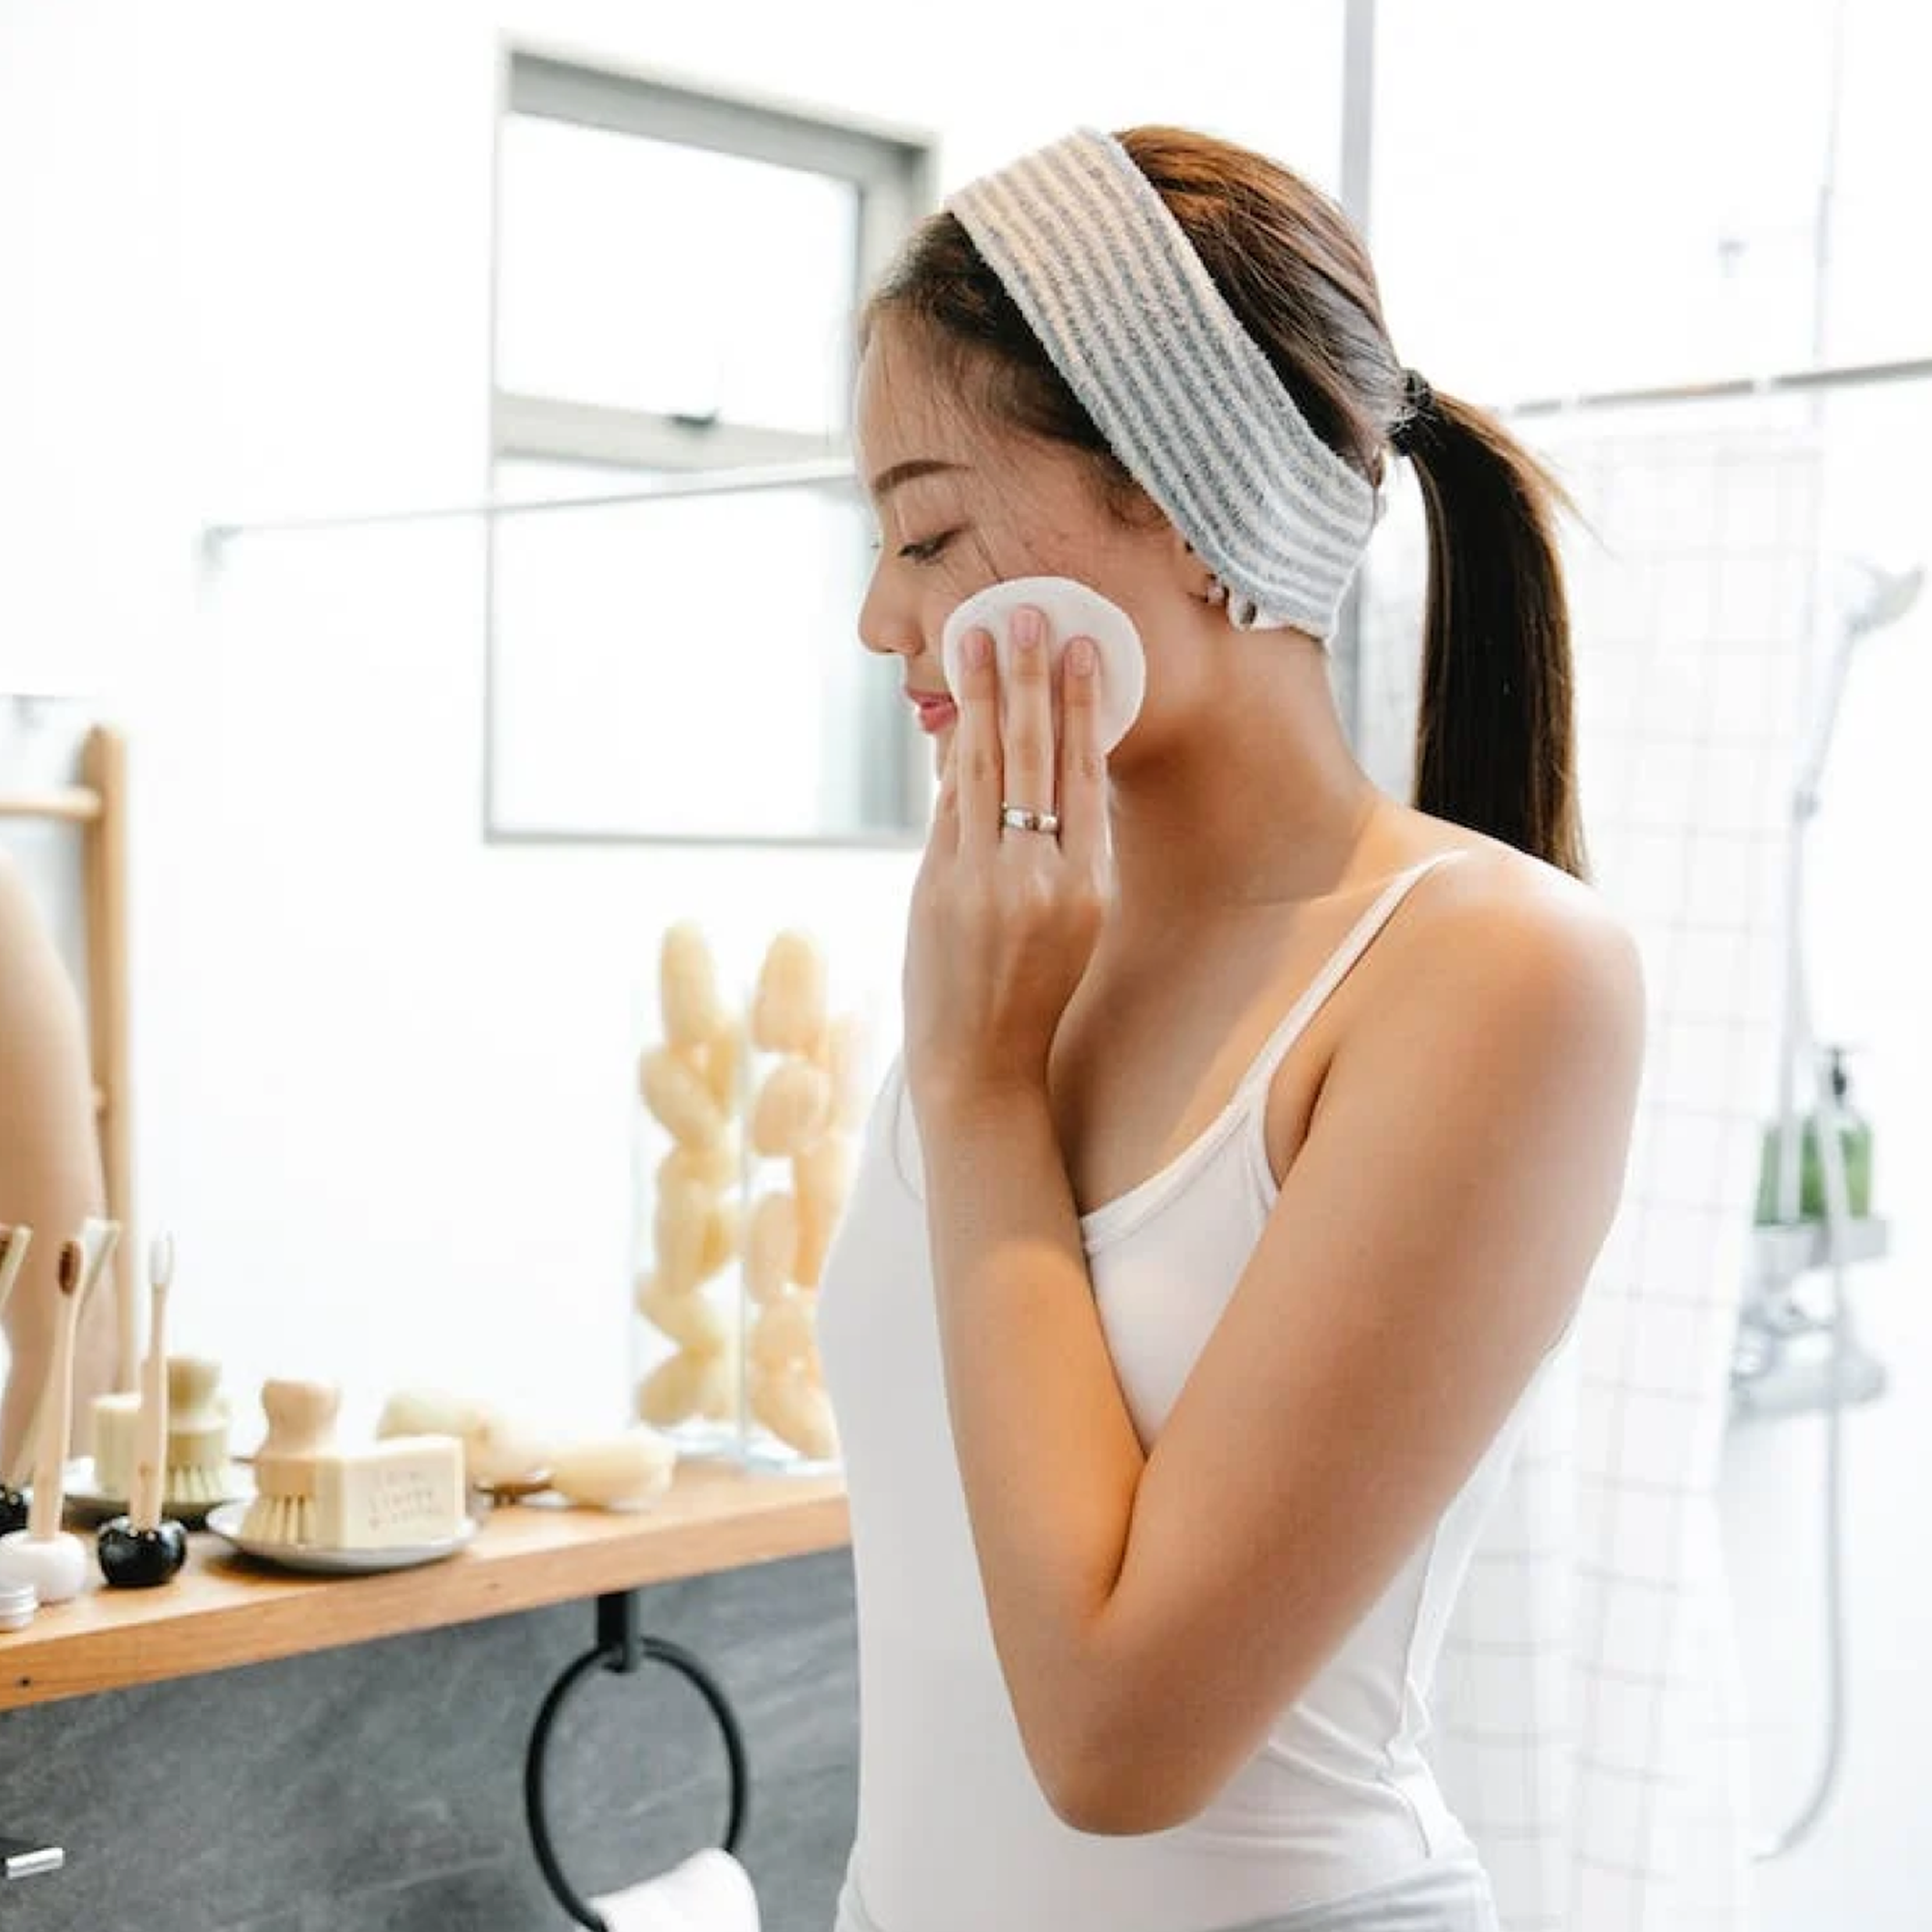 Everything you need to know about facial oil cleansing